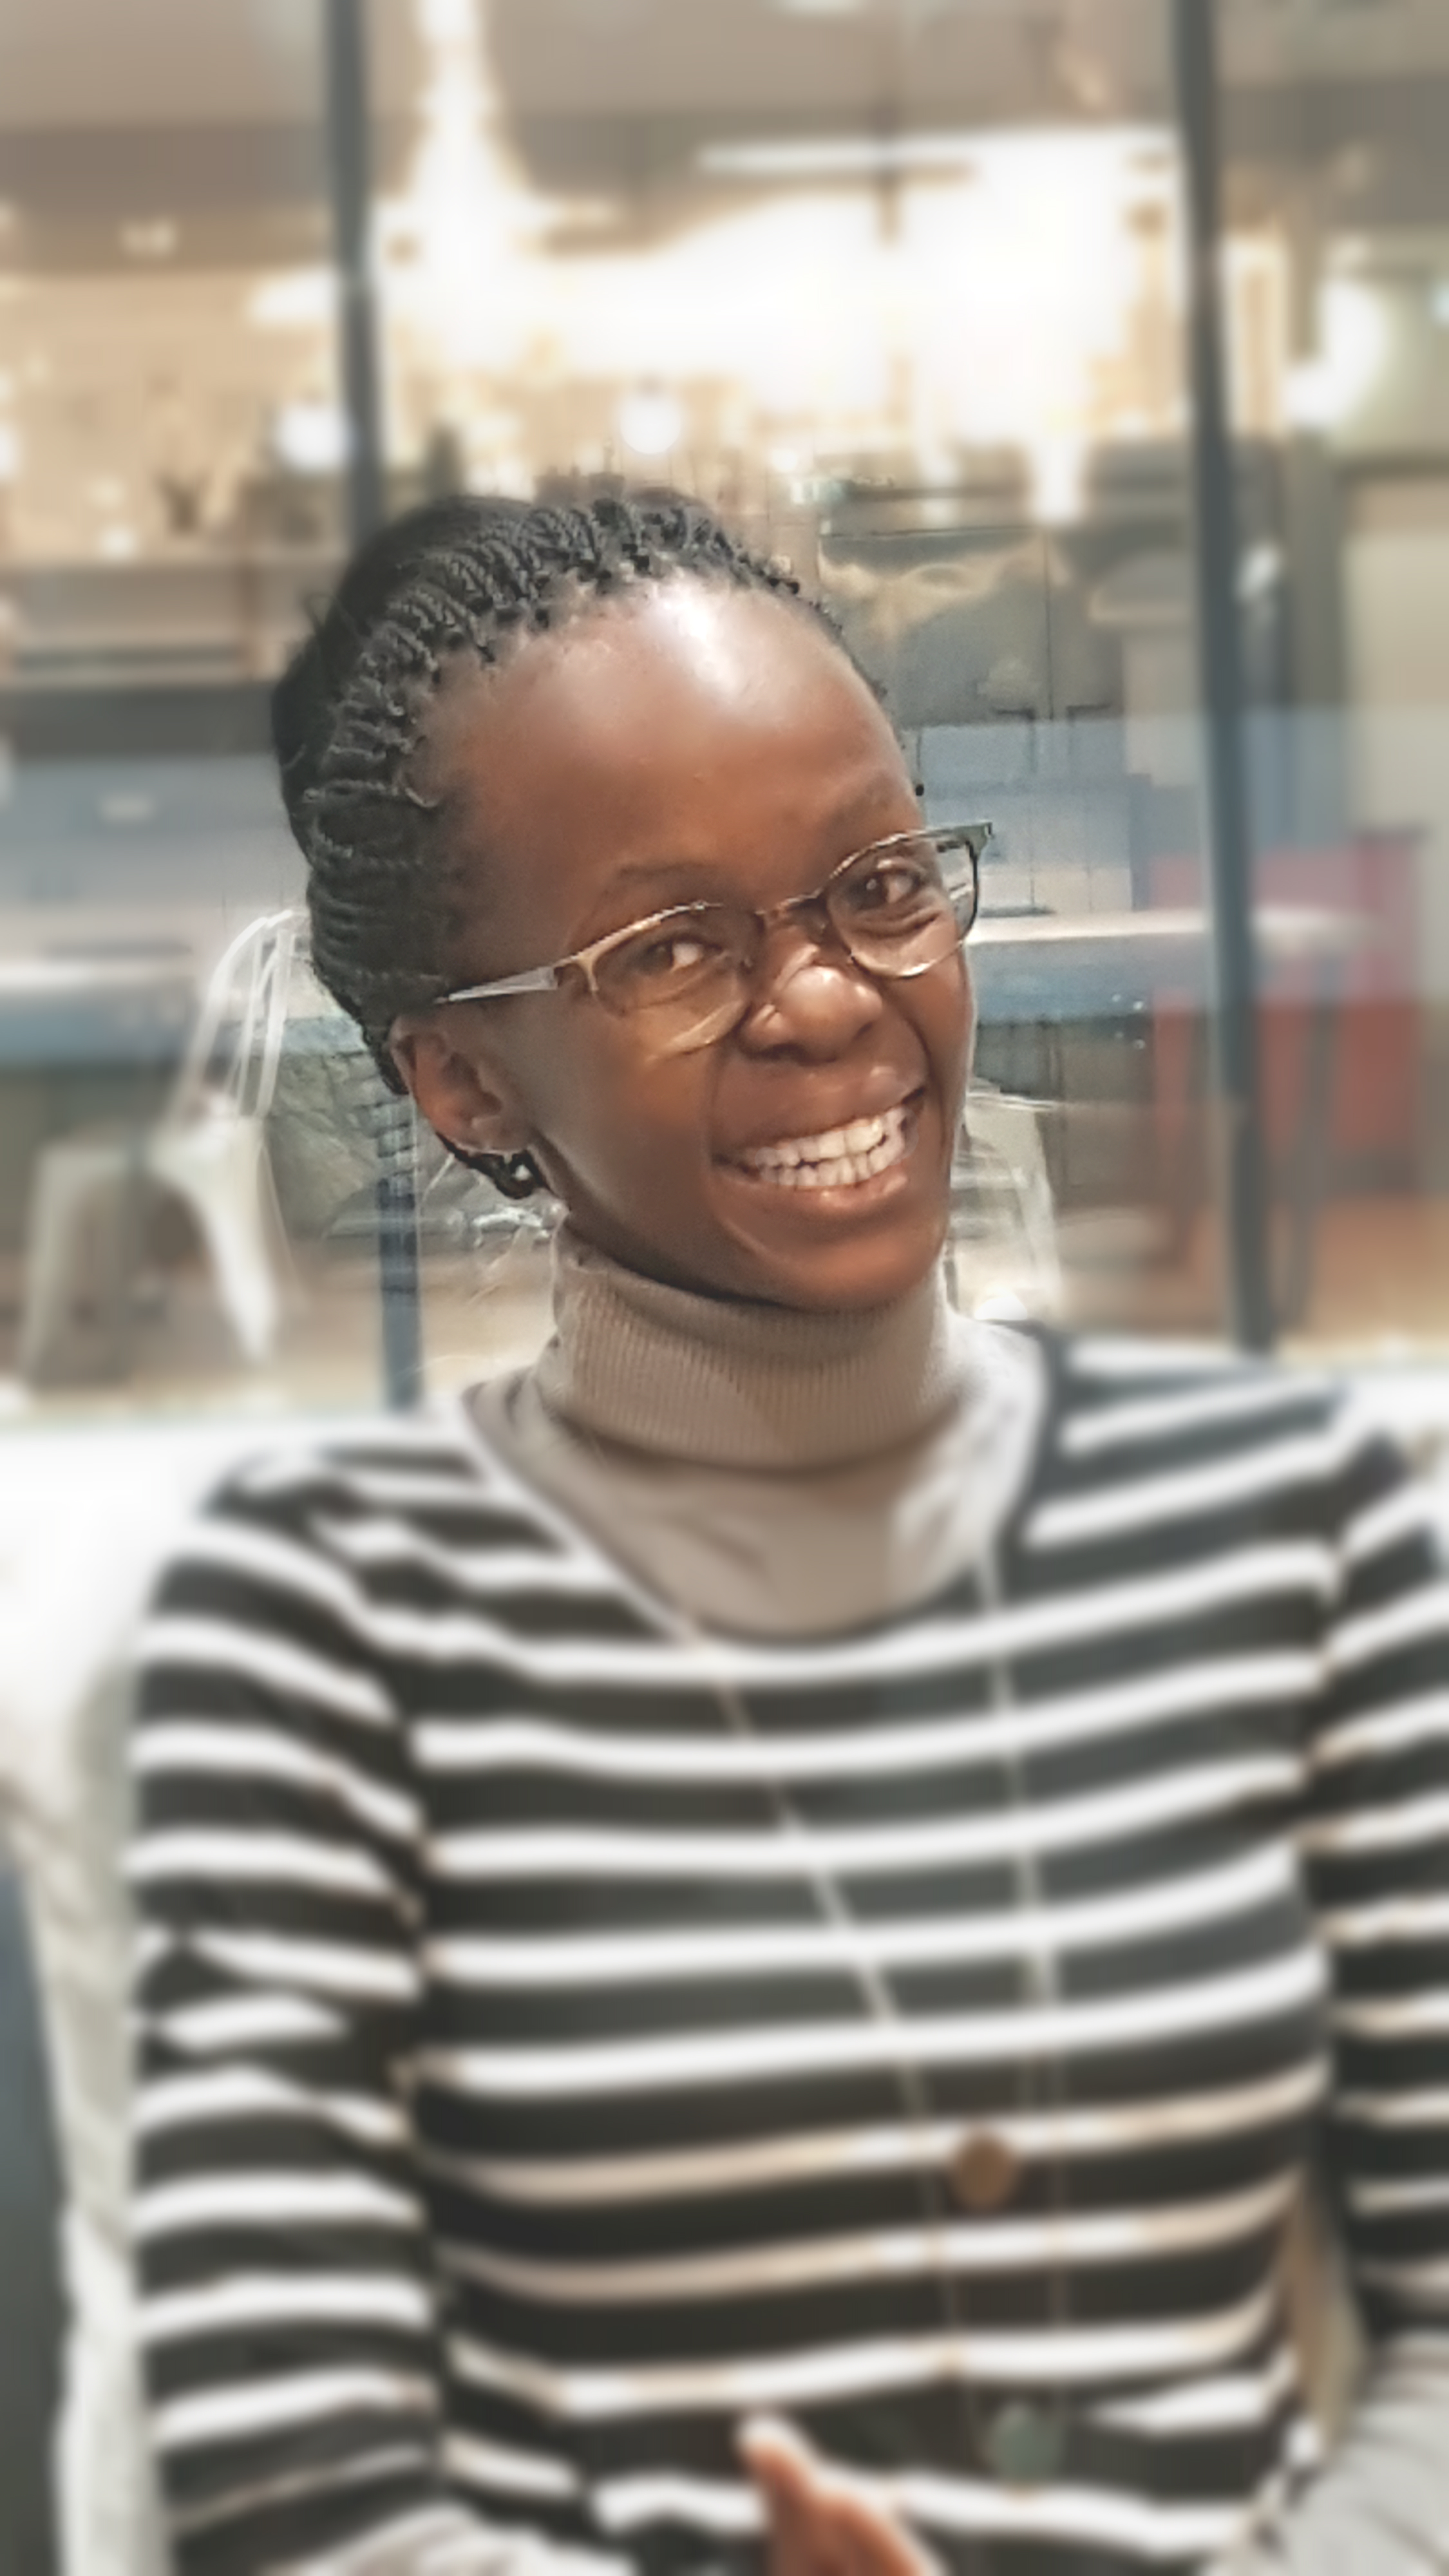 A picture of Keitumetse Thamane, a young black woman in a sweatshirt, smiling.